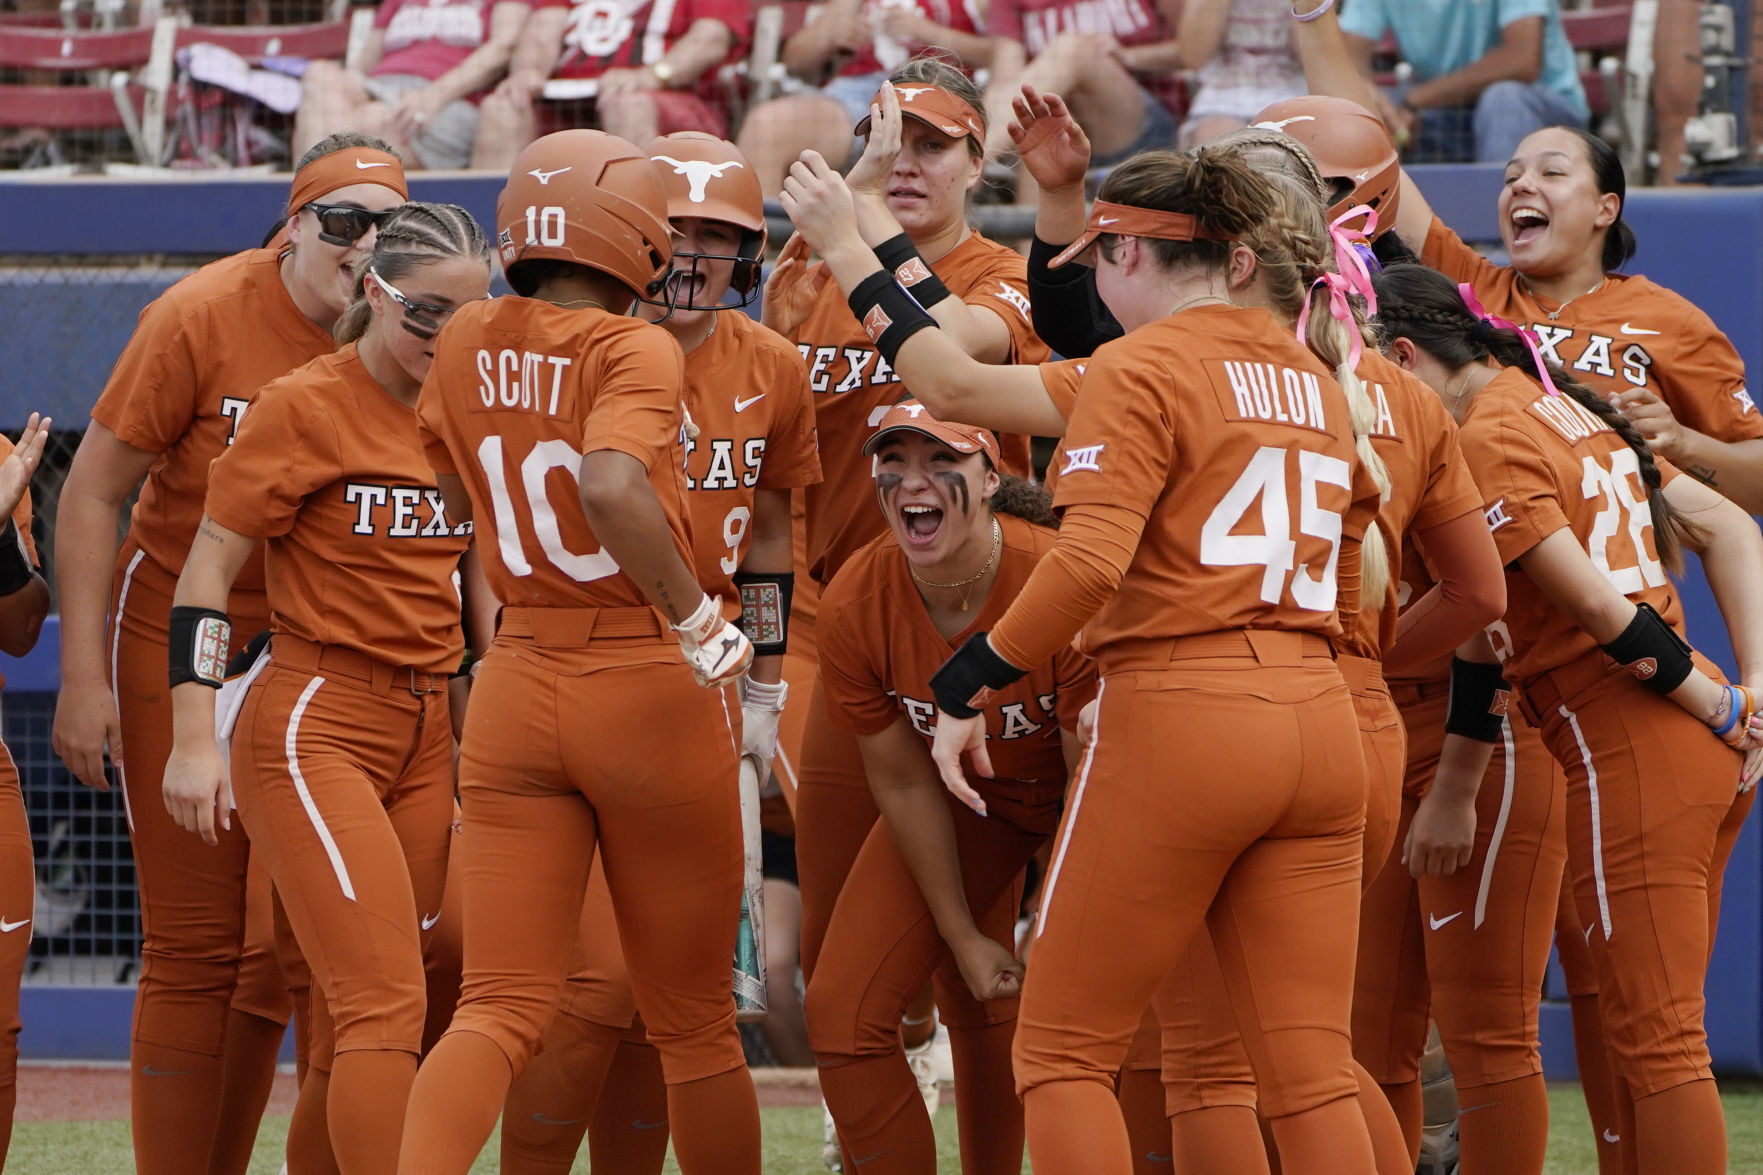 BEYOND HIGH SCHOOL Mia Scott headed to College World Series with UT Sports thefacts pic